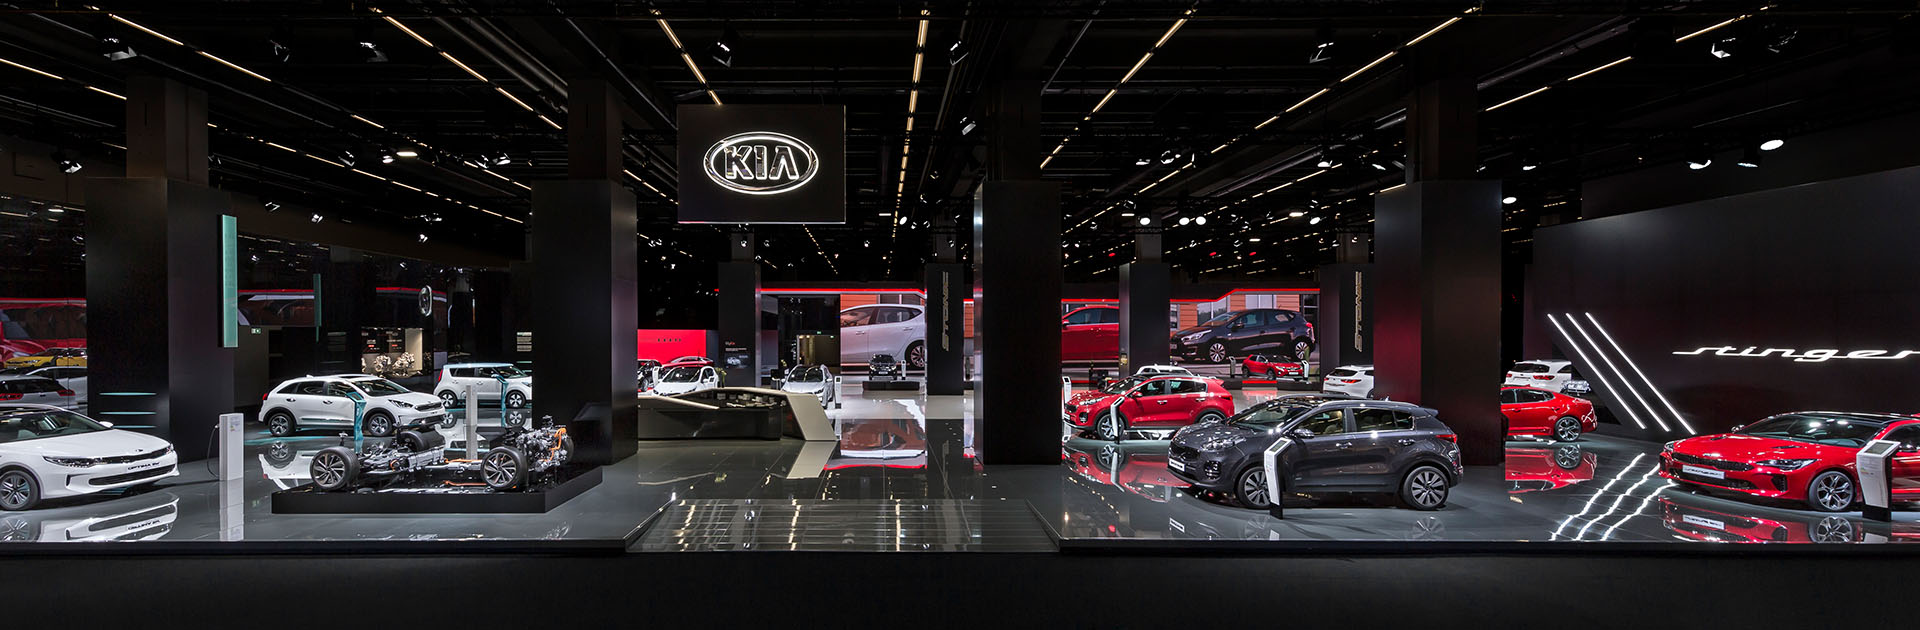 Exhibition stand builder in Frankfurt responsible for KIA's fair stand at IAA Mobility